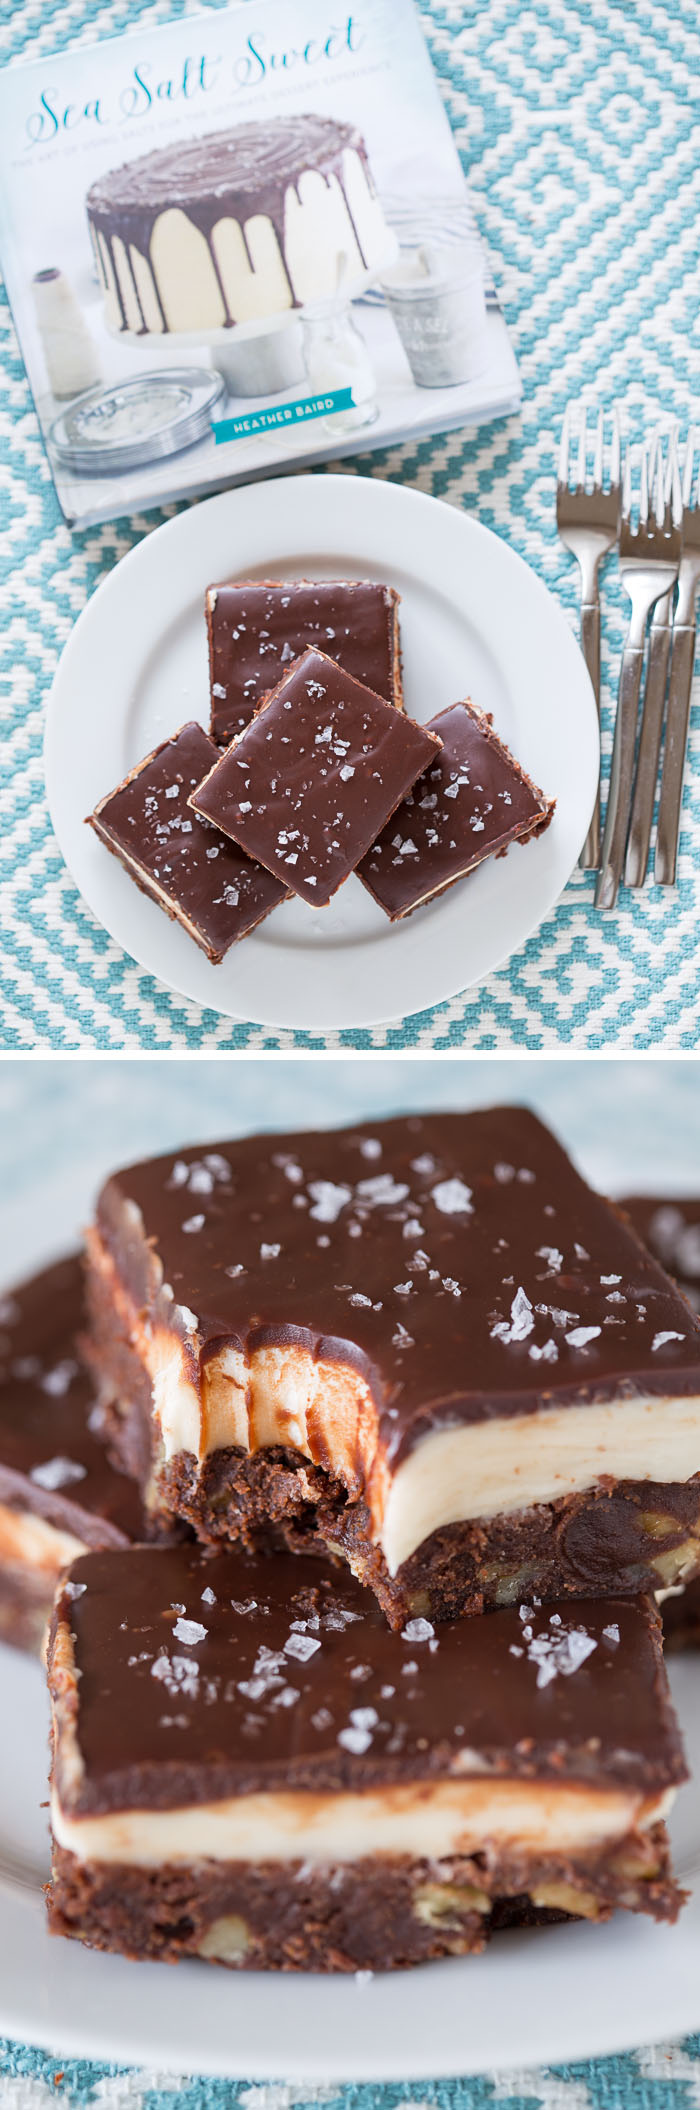 Double Chocolate Cream Cheese Brownies with Maldon Flake (and a review of Sea Salt Sweet!)